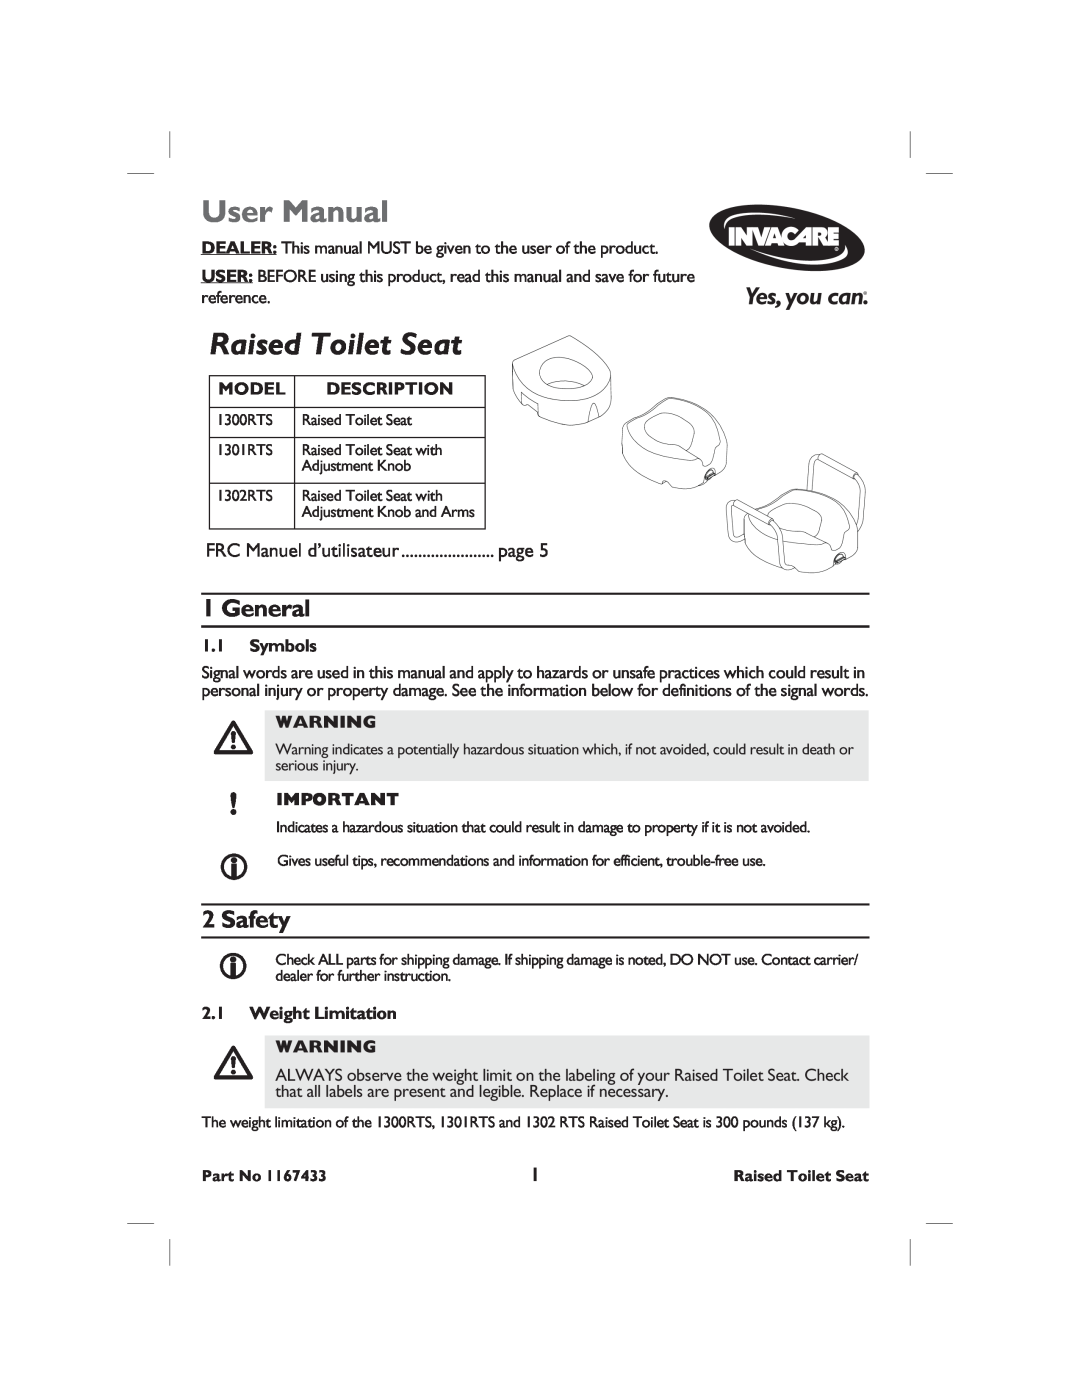 Invacare 1302RTS, 1301RTS user manual User Manual, Raised Toilet Seat, General, Safety, Model, Description, page, Symbols 